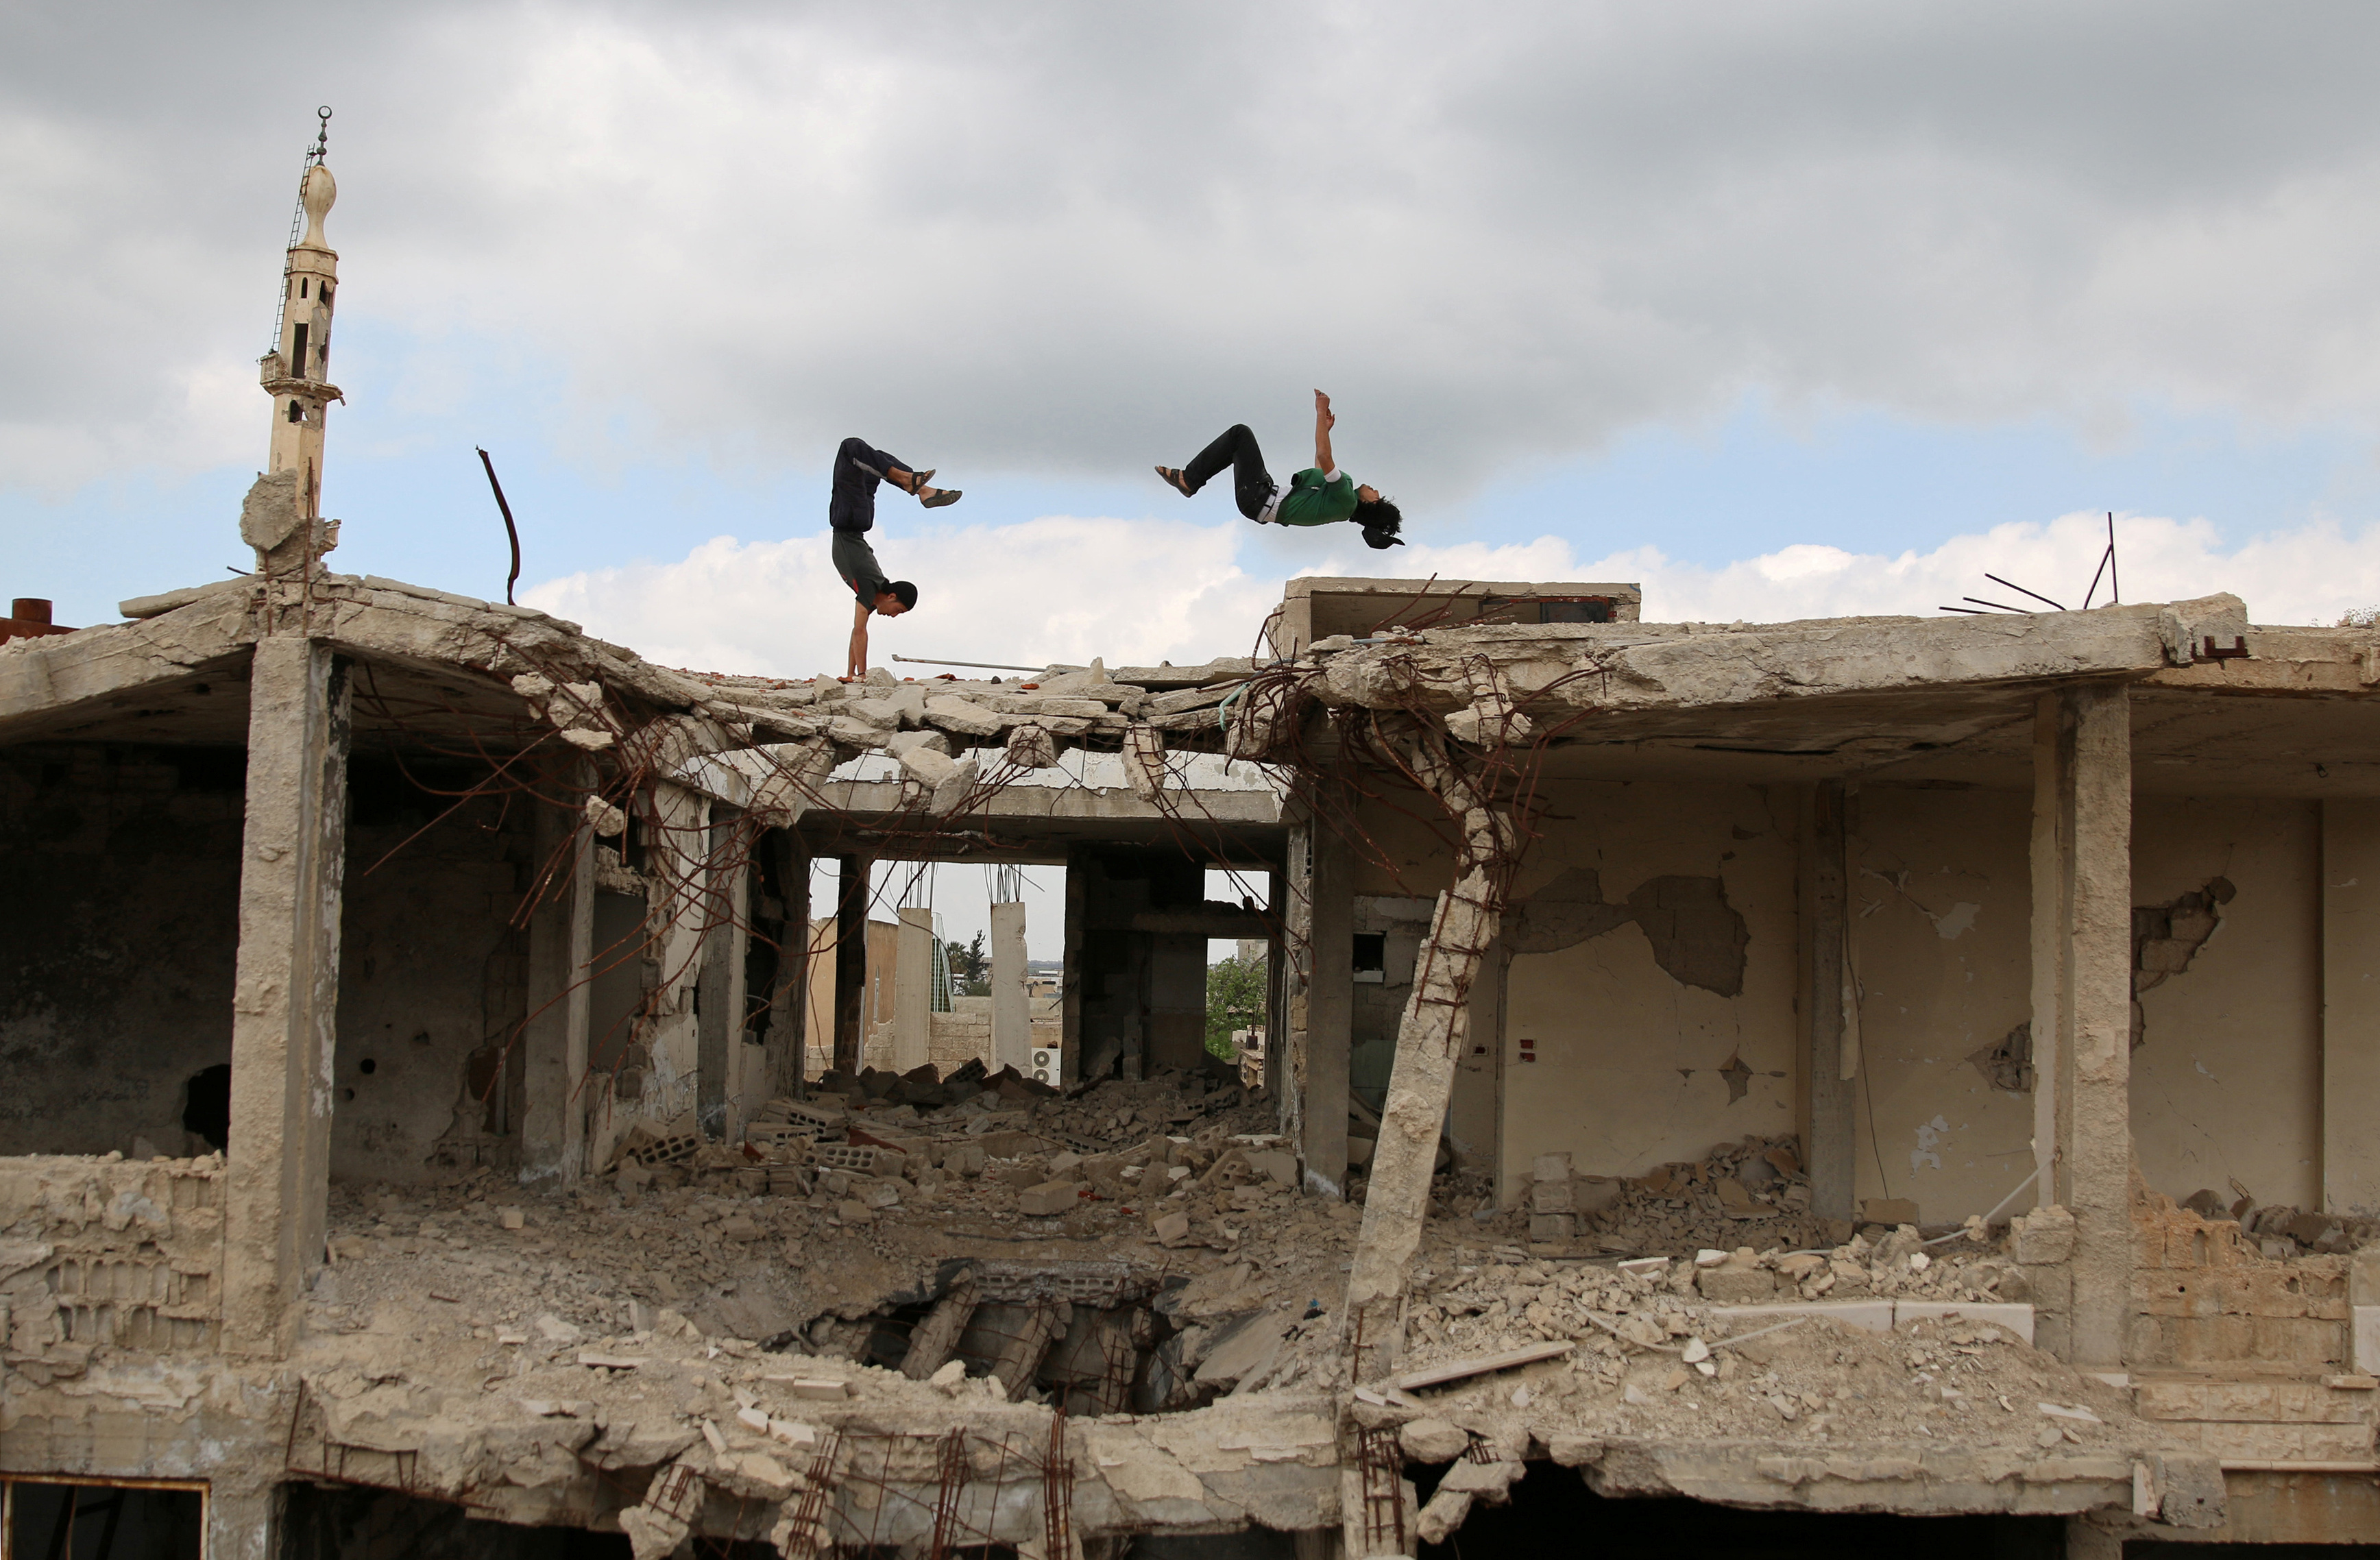 Syrian teenagers perform Parkour moves atop city ruins.